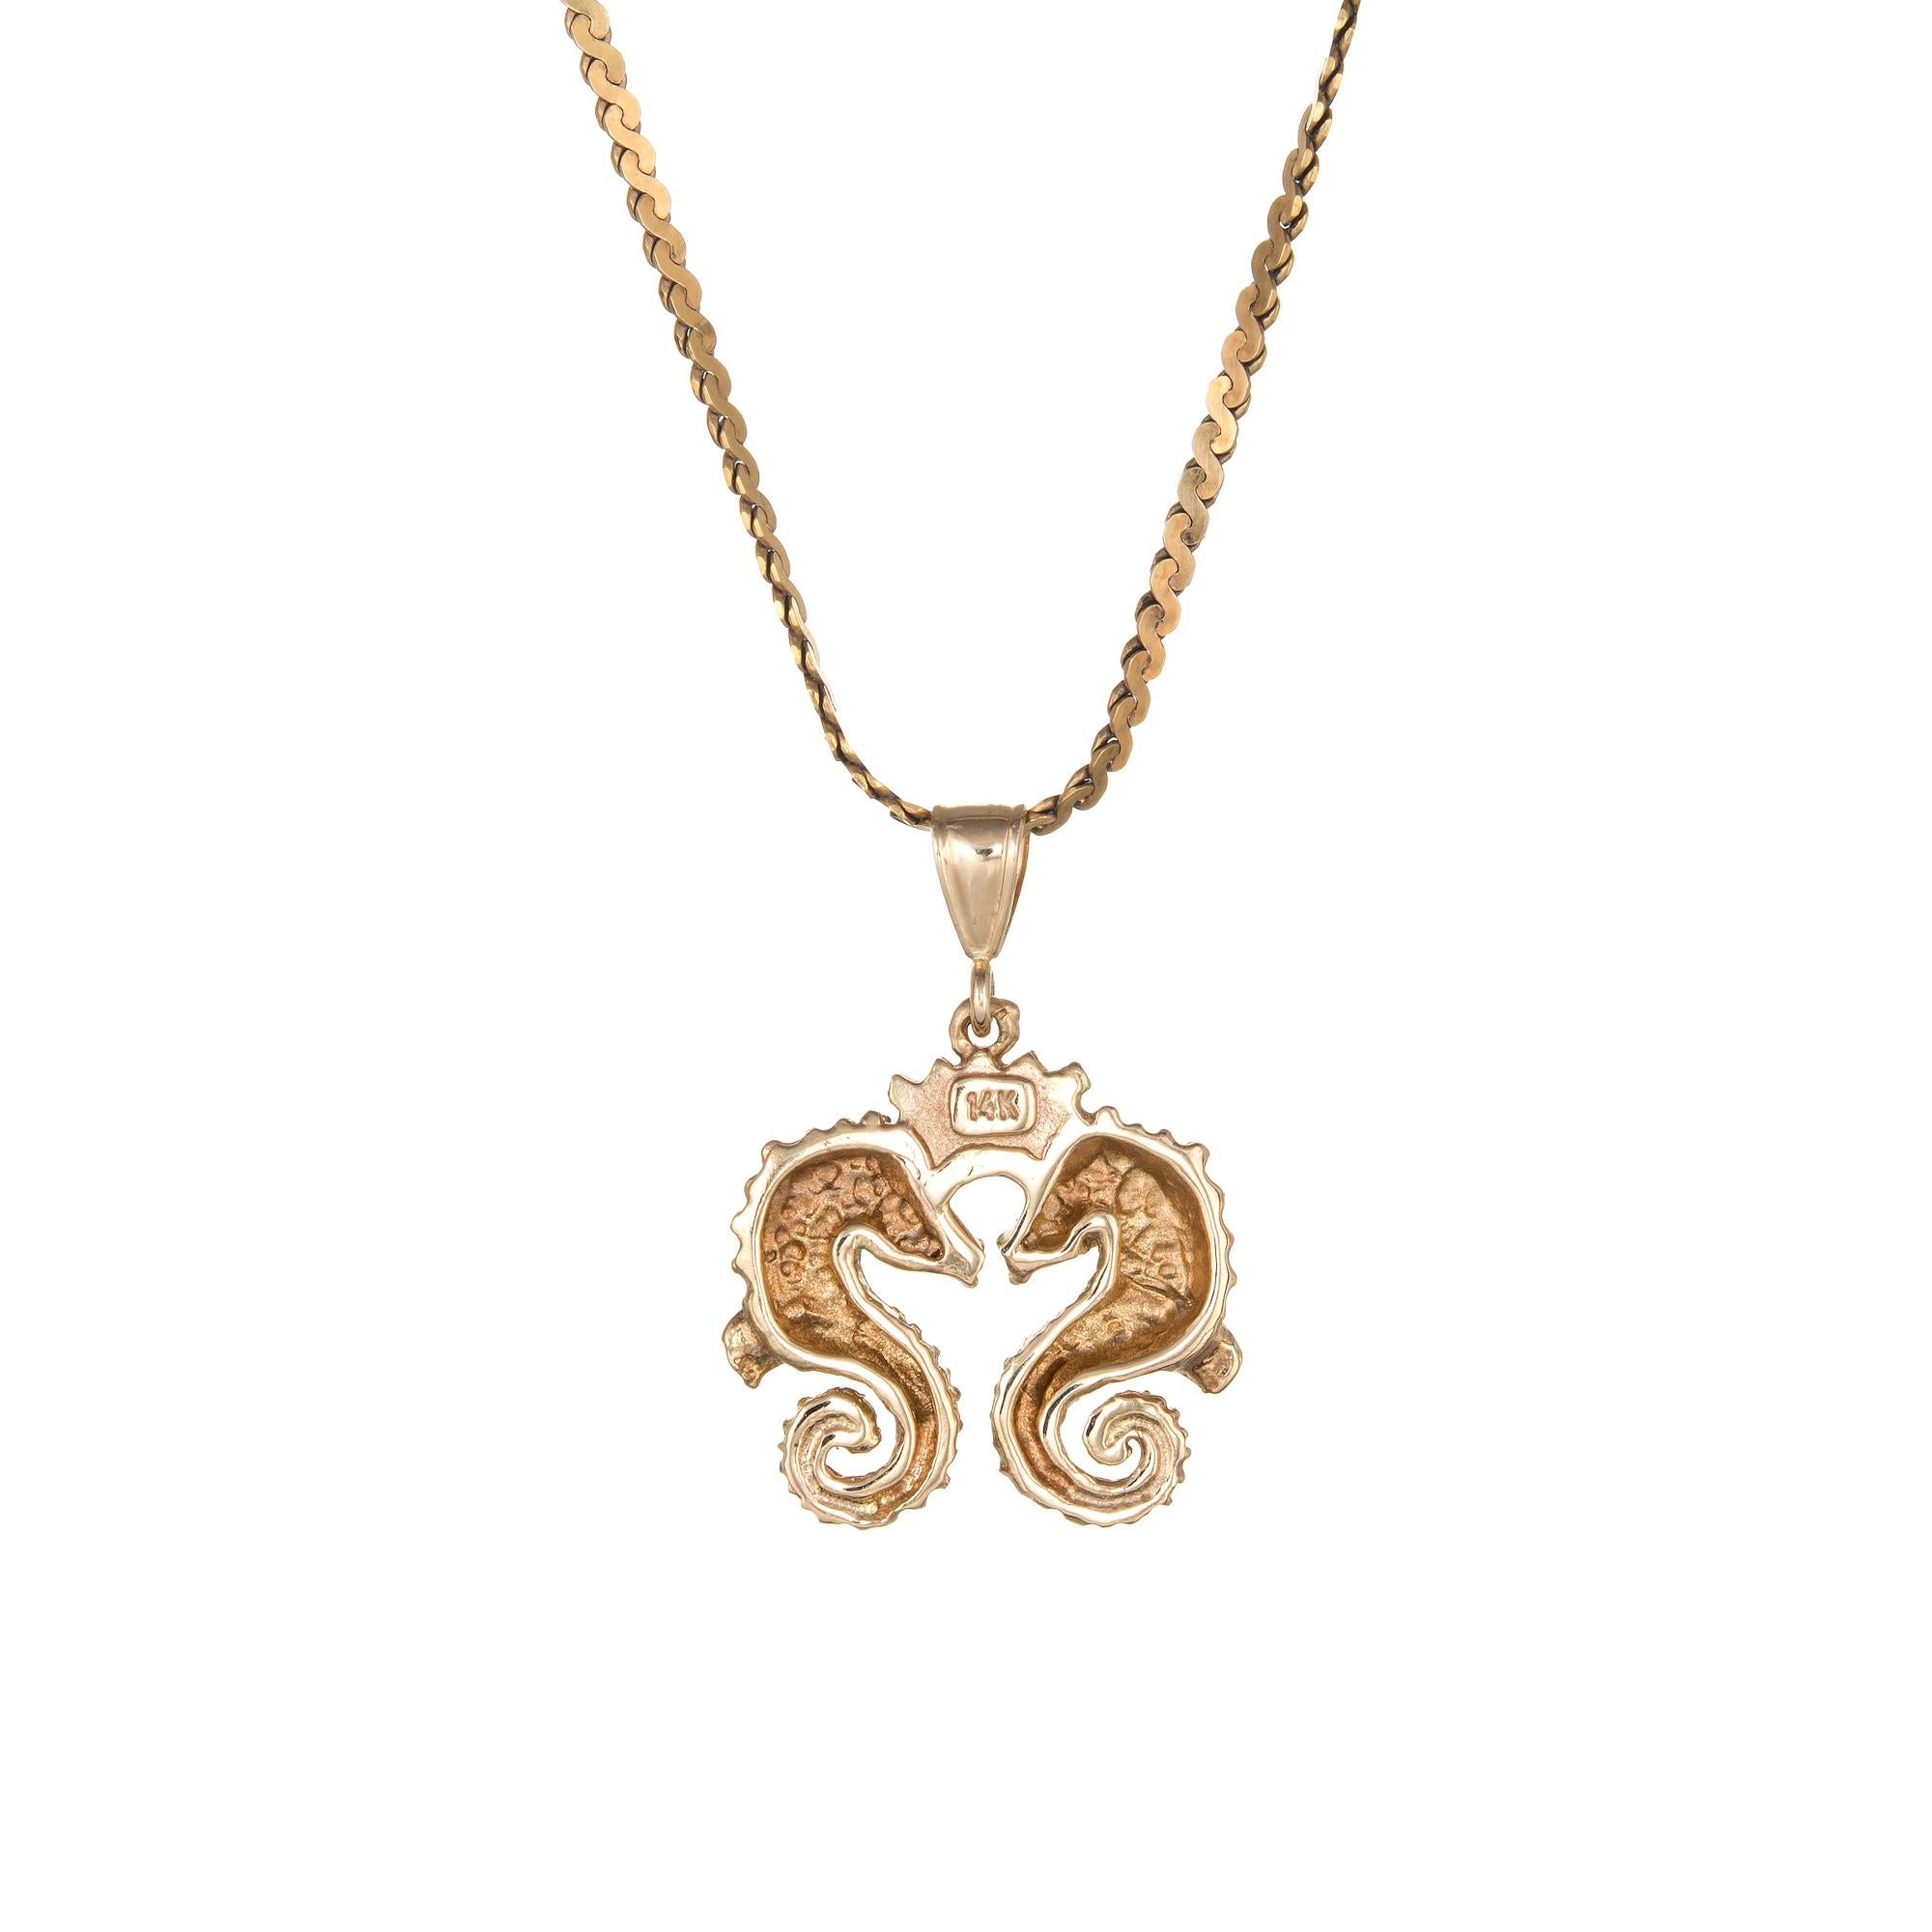 Charming seahorse pendant & necklace crafted in 14 karat yellow gold.  

The pendant comes with a fine link 14k yellow chain that measures 18 inches in length. The two seahorses join together in an embrace. 

The pendant & necklace is in excellent